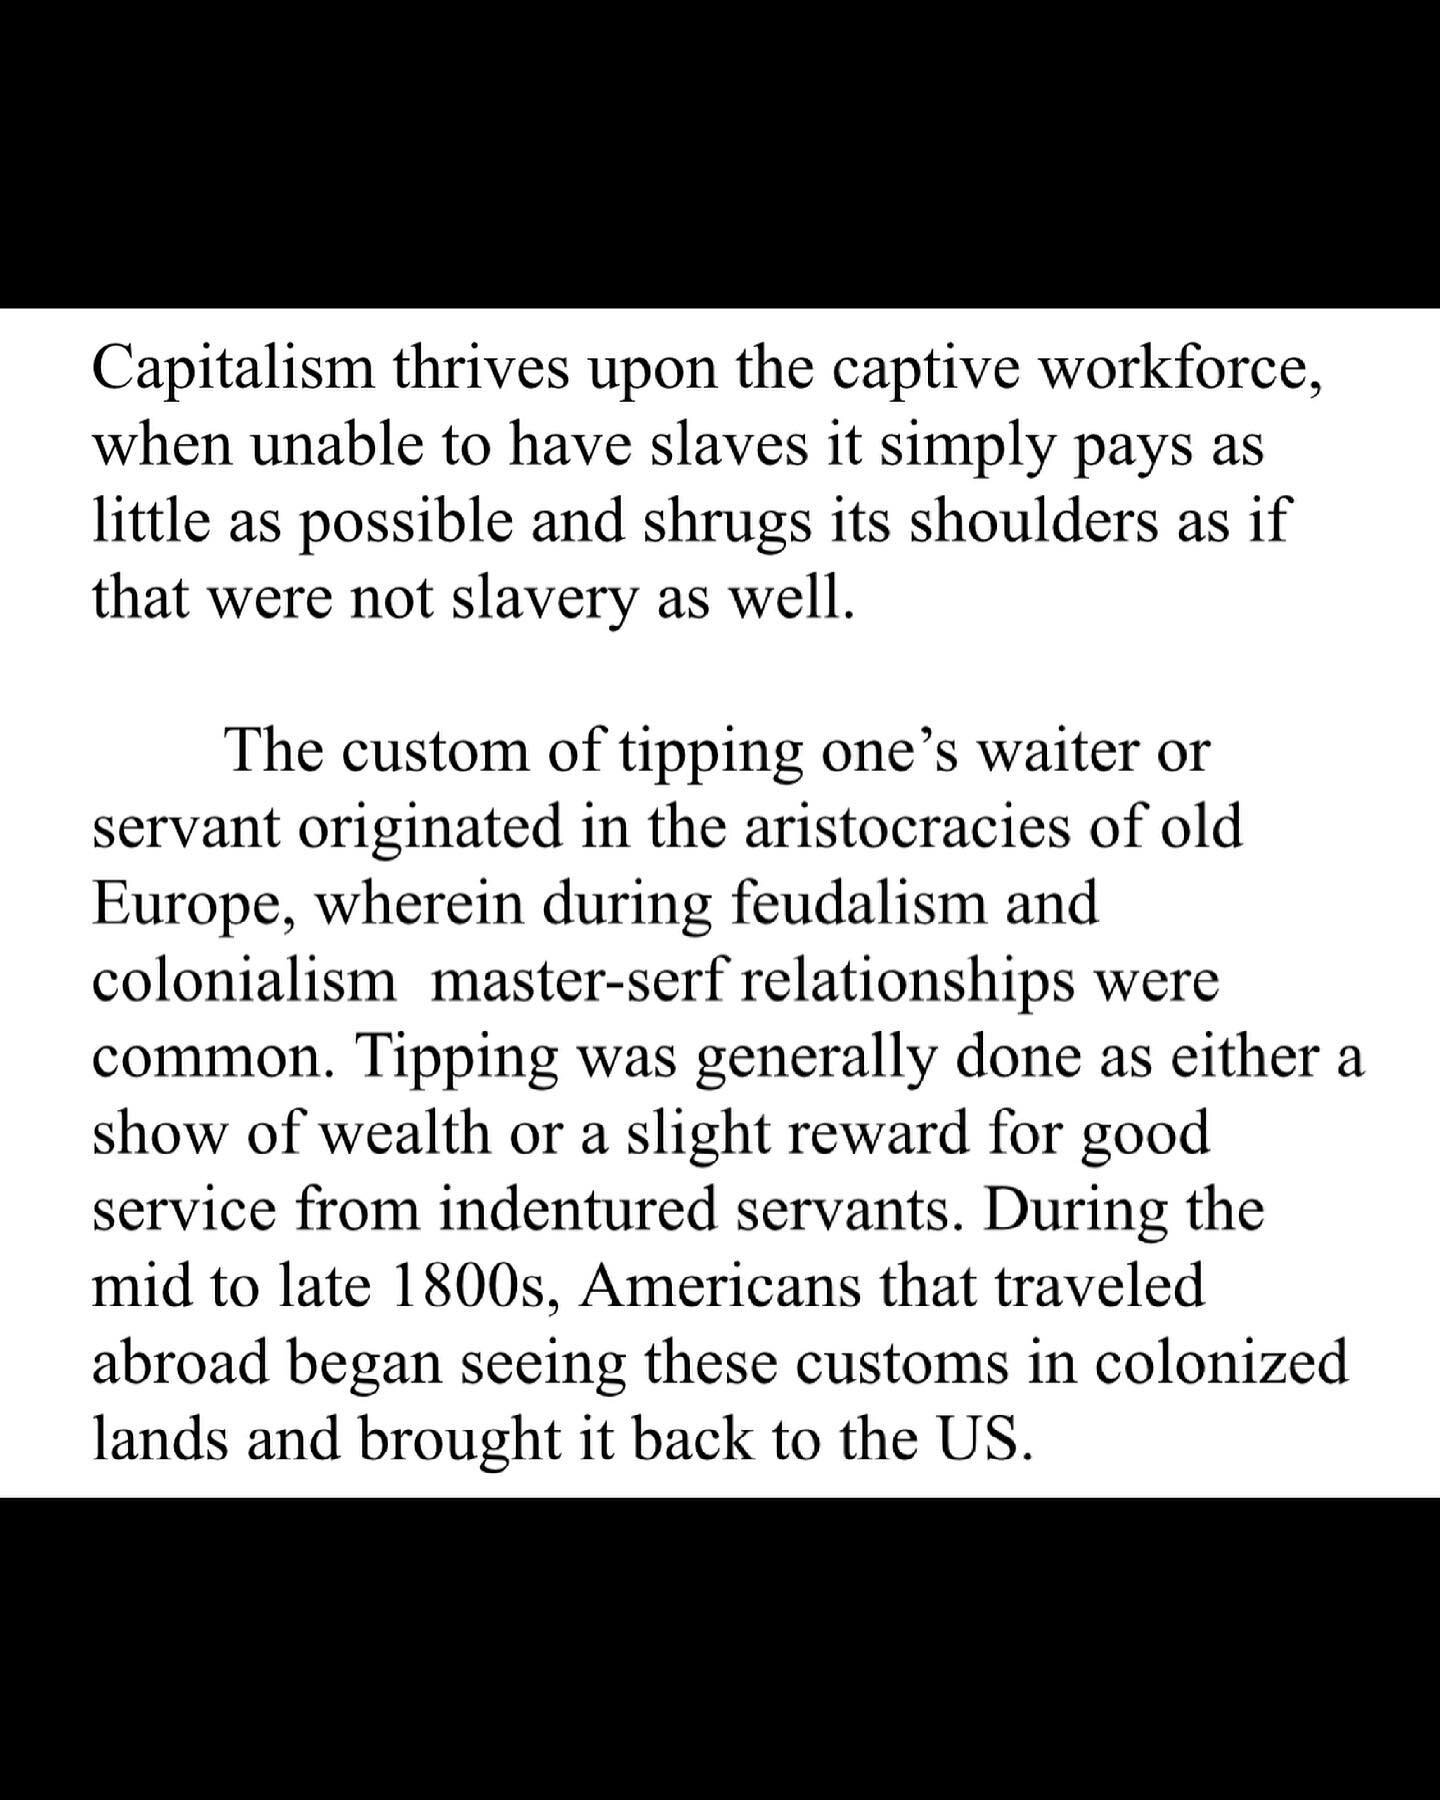 Not many people are talking about it, but there is a decentralized general strike happening in many industries at the moment (particularly in the service sector). Here is an applicable portion of my upcoming book that&rsquo;s relevant. My old books a